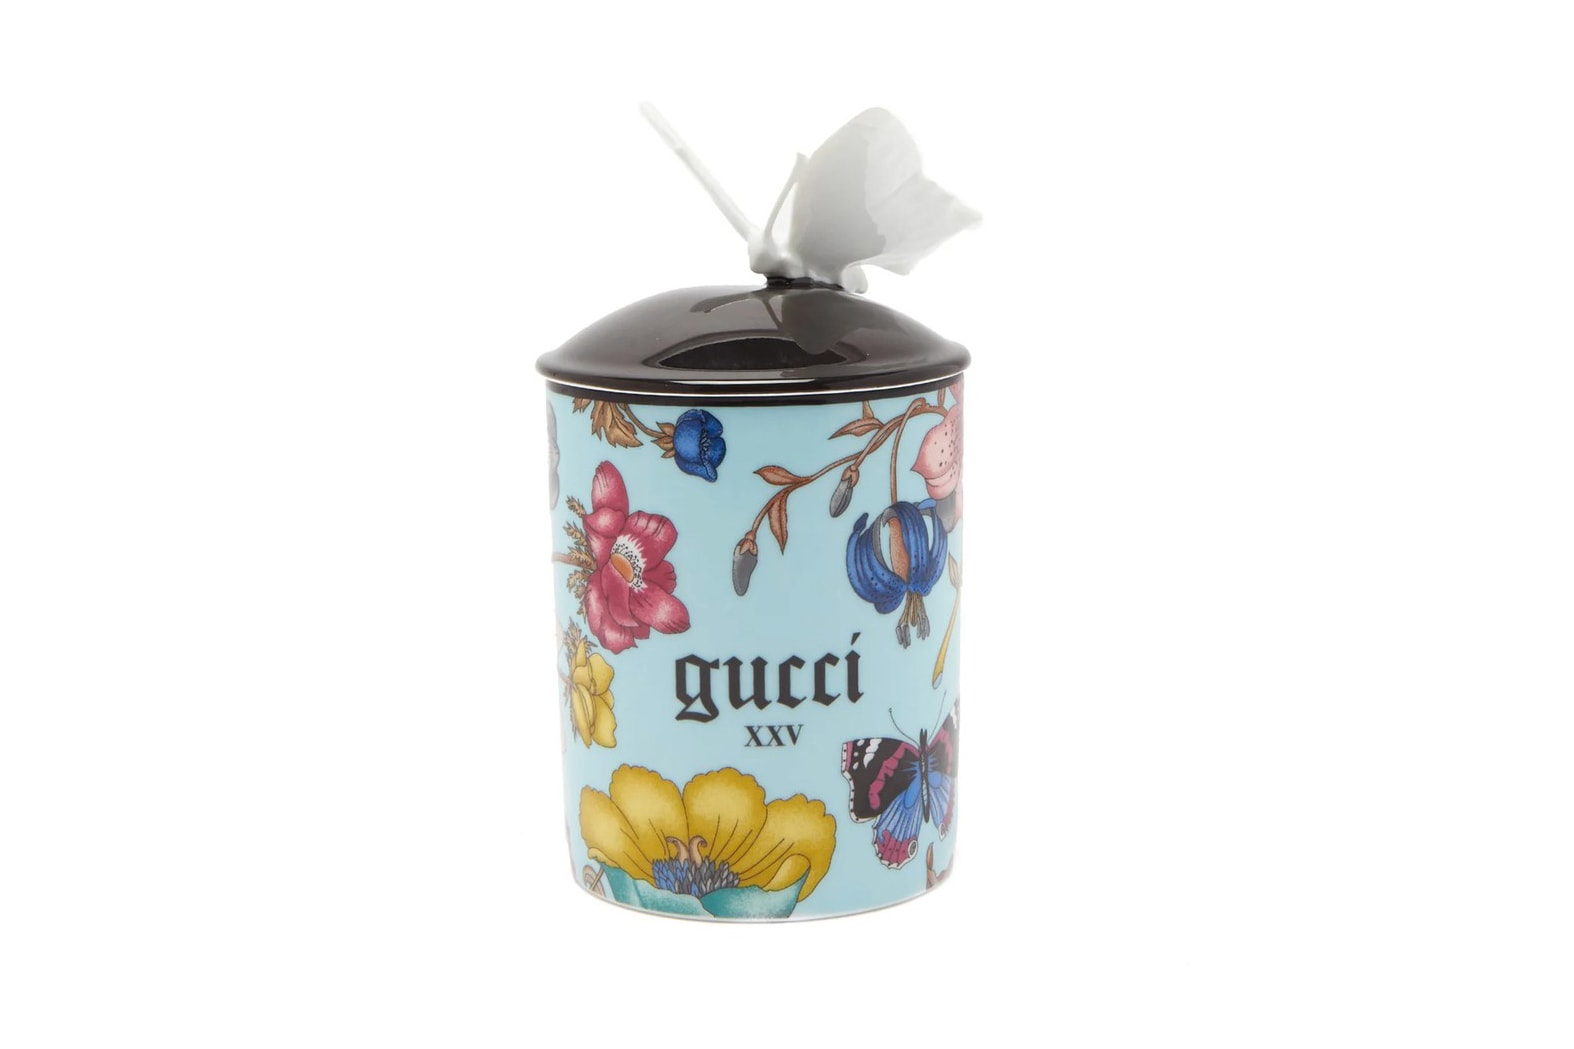 Gucci Homeware Candles Trinket Dishes Design Home Goods Accessories Jewelry Storage Alessandro Michele Scents Fragrances Indoors Lockdown Experiences Luxury Italian 